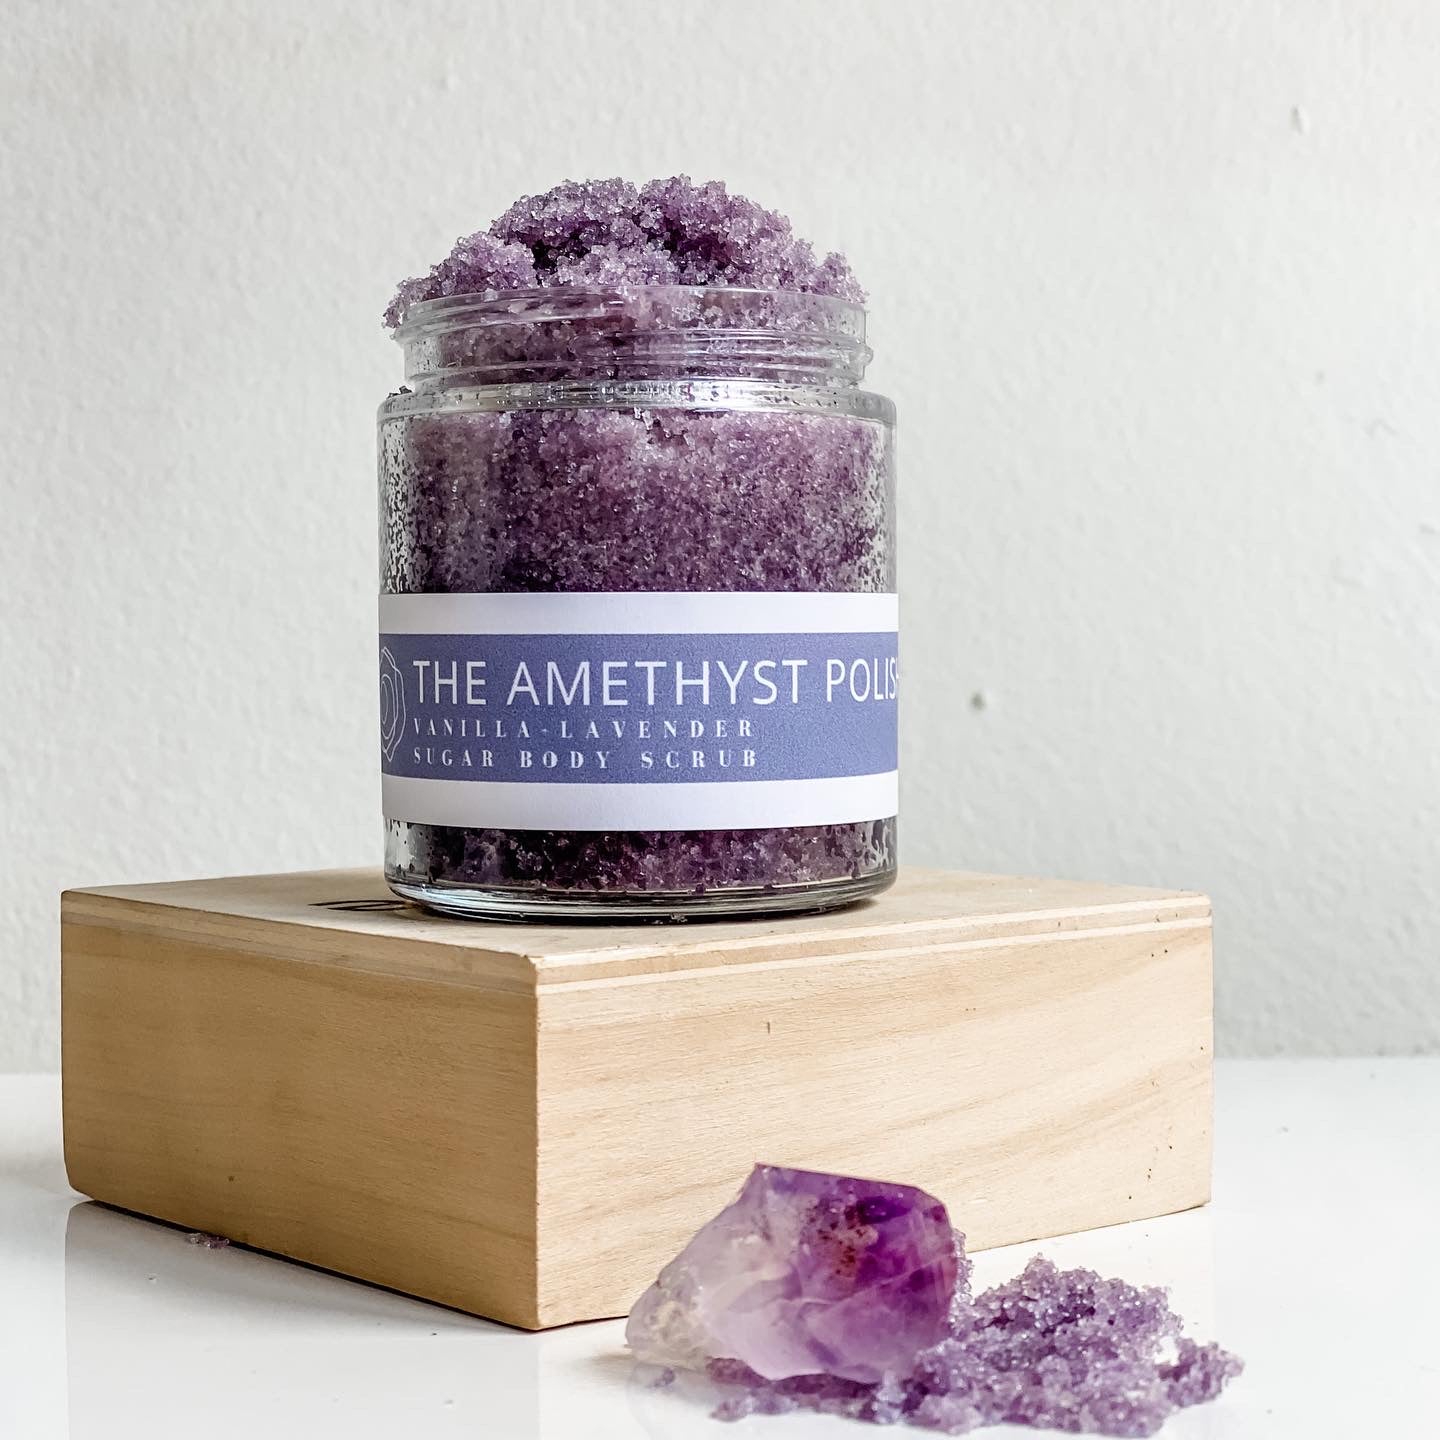 Amethyst Crystal Bath Gift Set - Handmade with Natural Ingredients. Hidden Forest Naturals